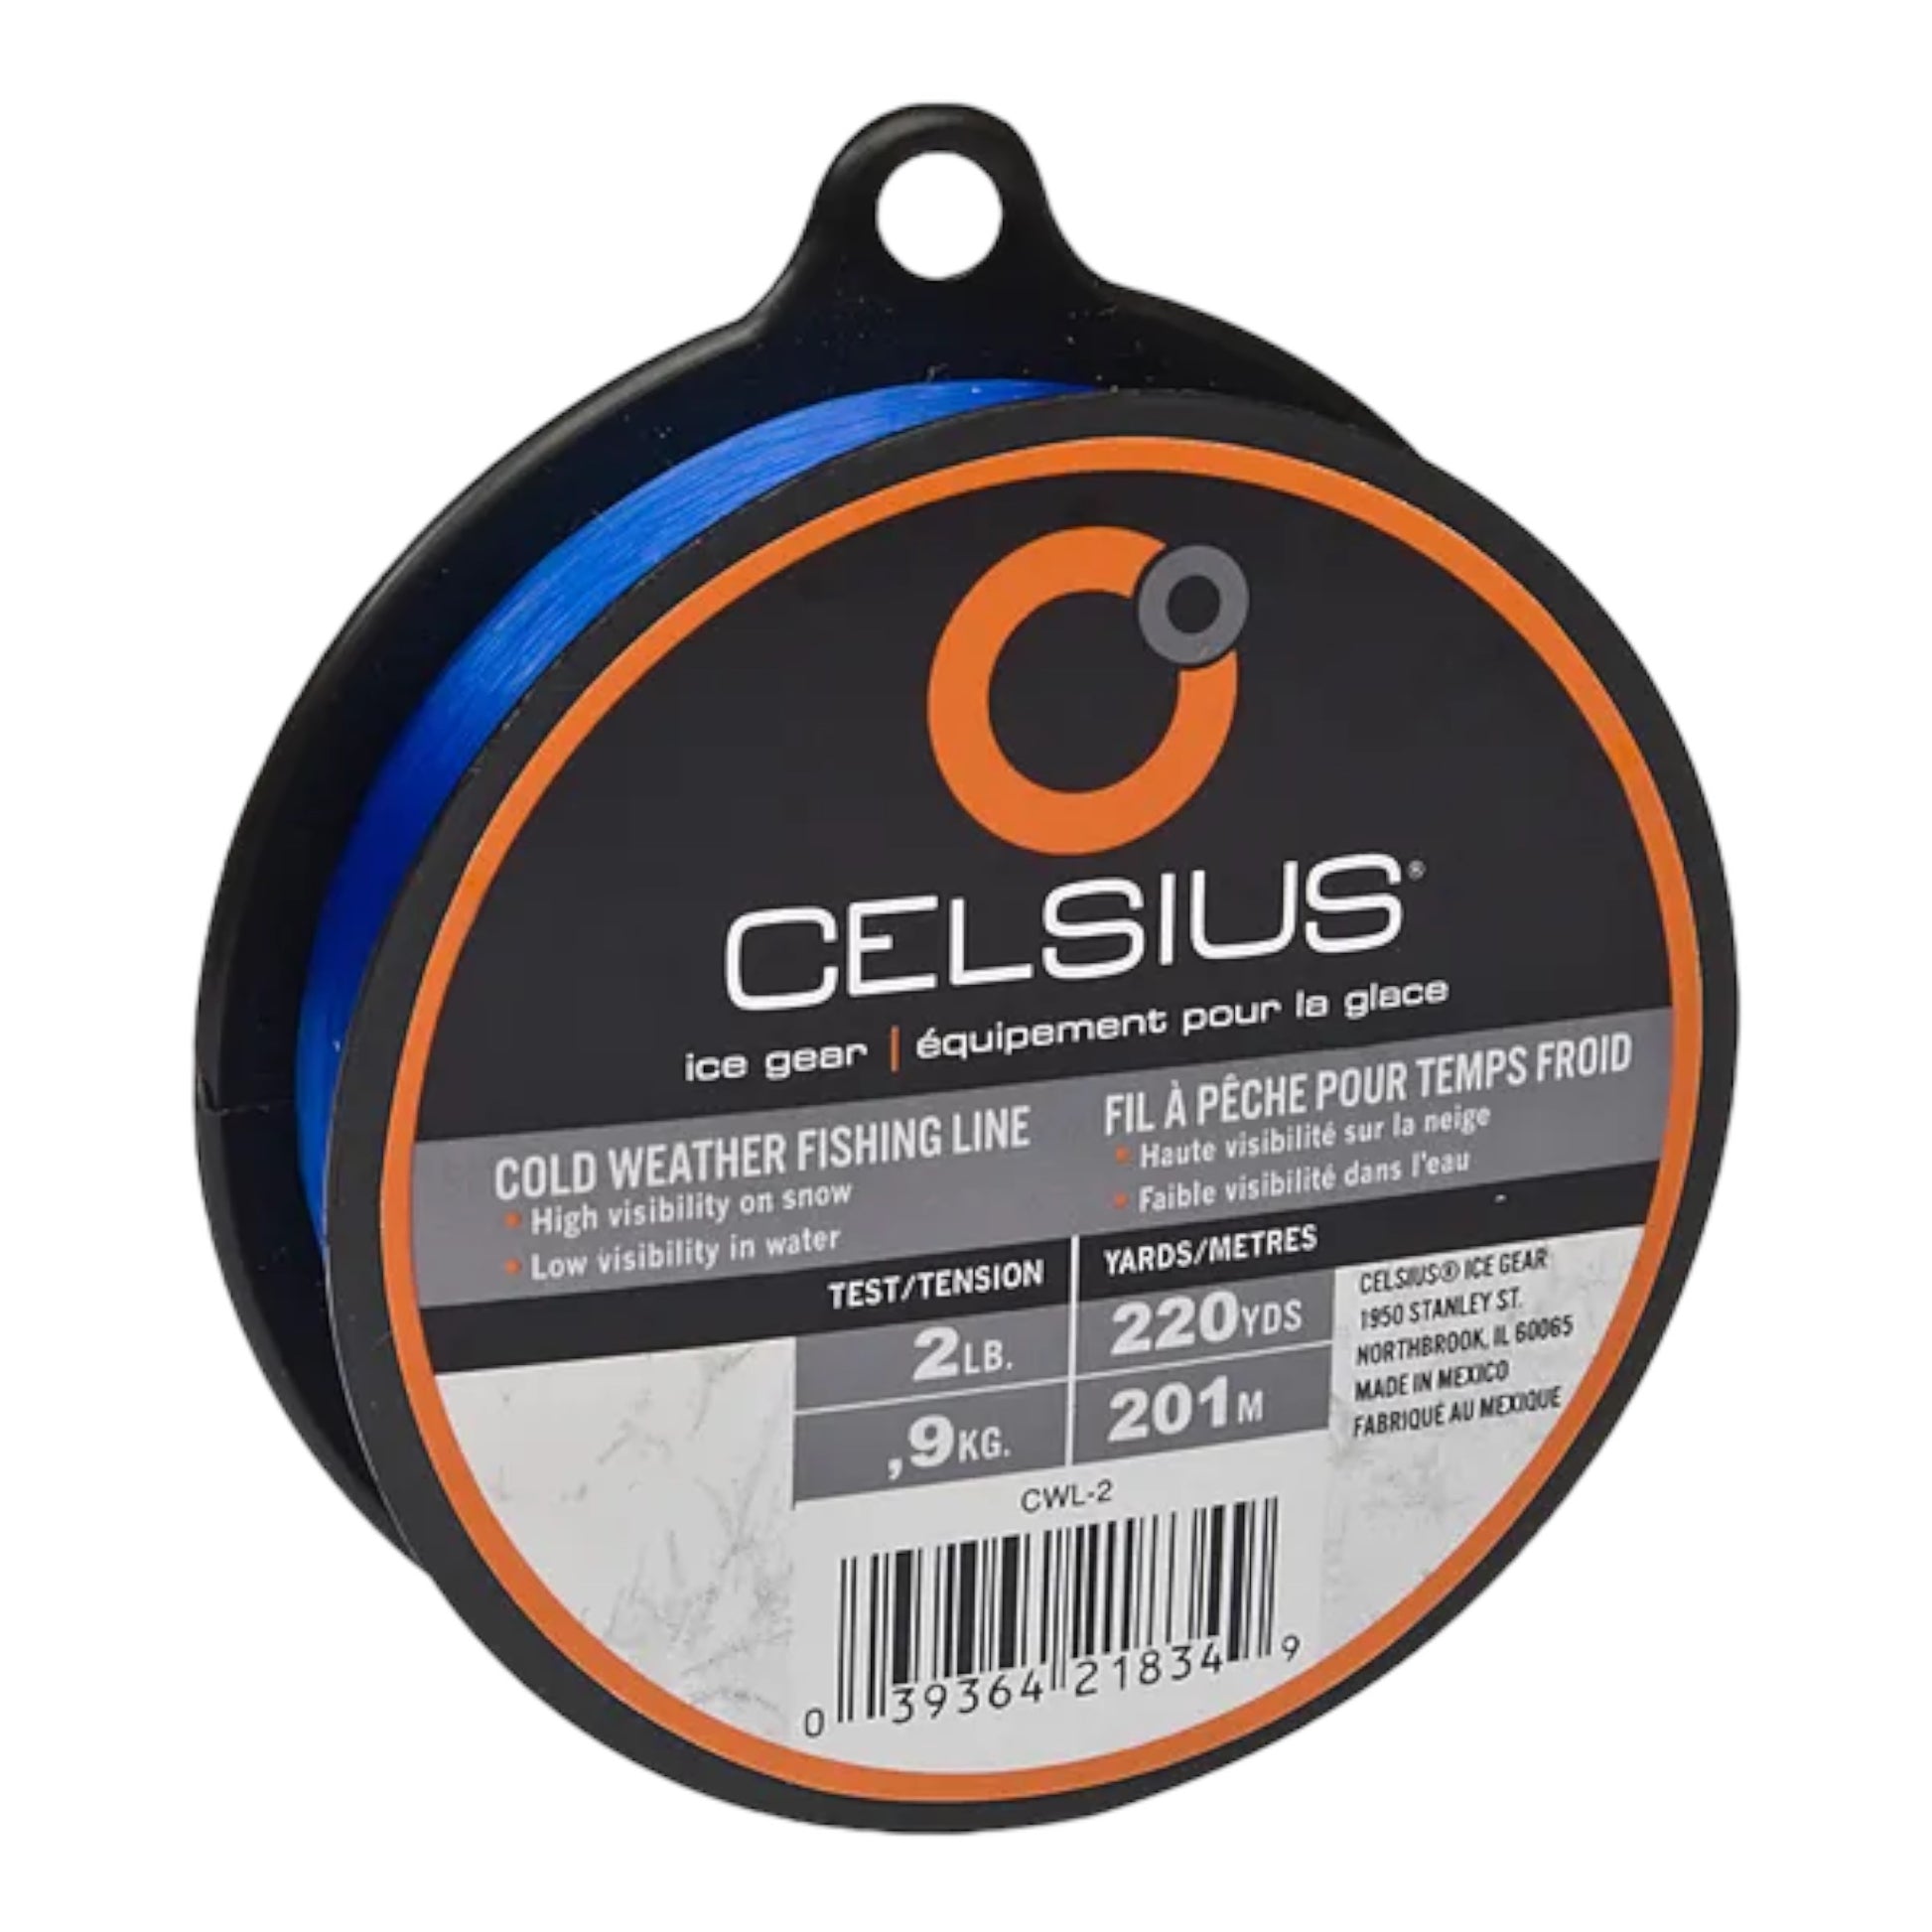 Celsius Cold Weather Fishing Line – Three Rivers Tackle